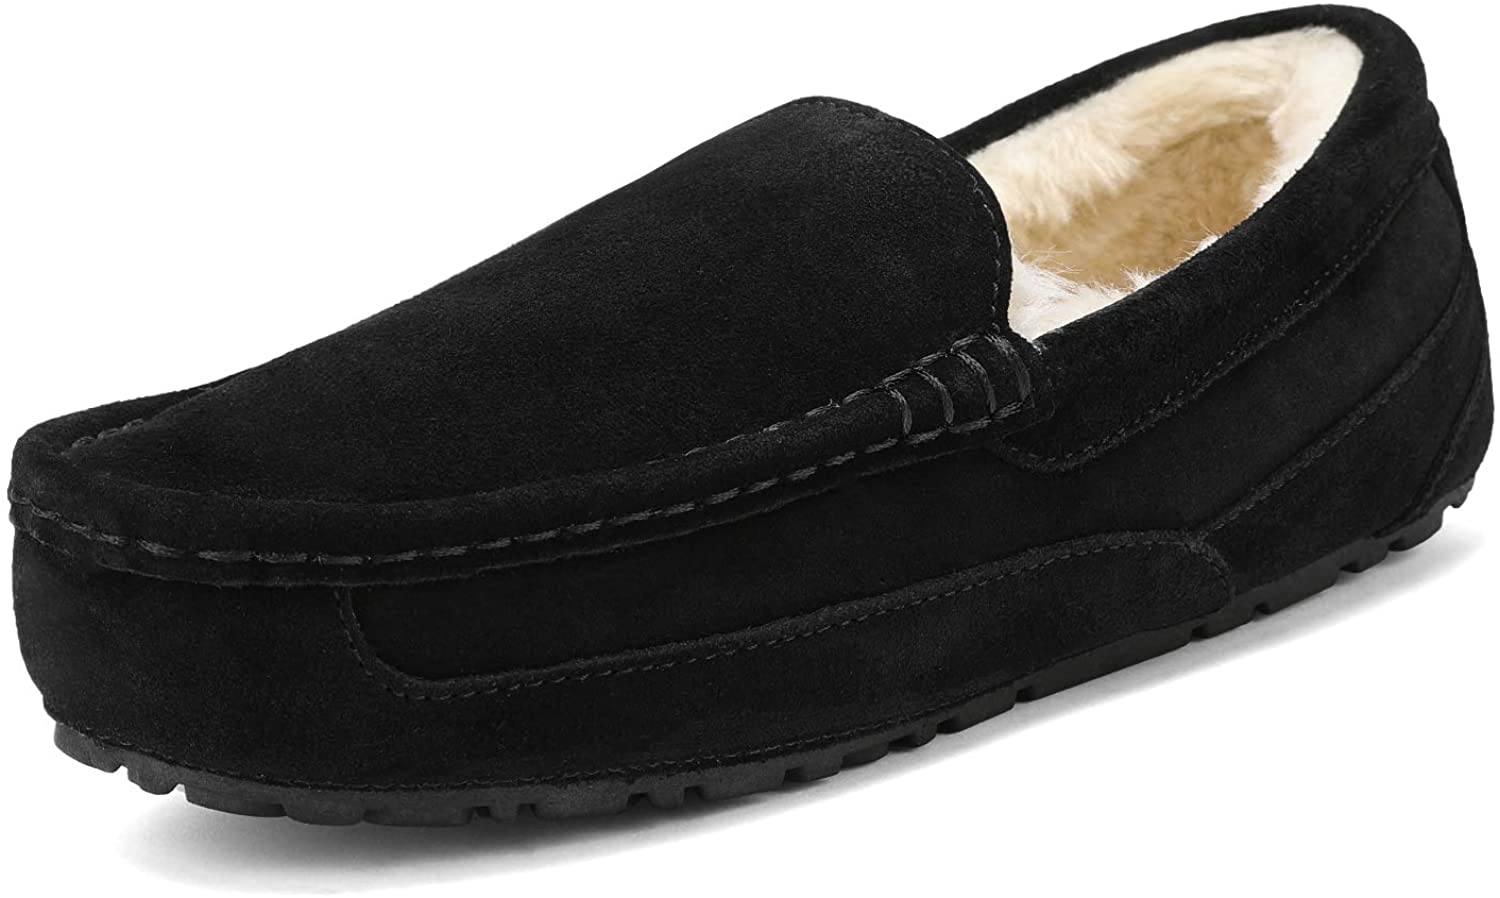  Damyuan Mens House Slippers Winter Indoor/Outdoor Warm Soft  Fuzzy Comfy Fuzzy Anti-Skid Slip on Walking Shoes Fluffy Loafer Slippers,  Black,6.5